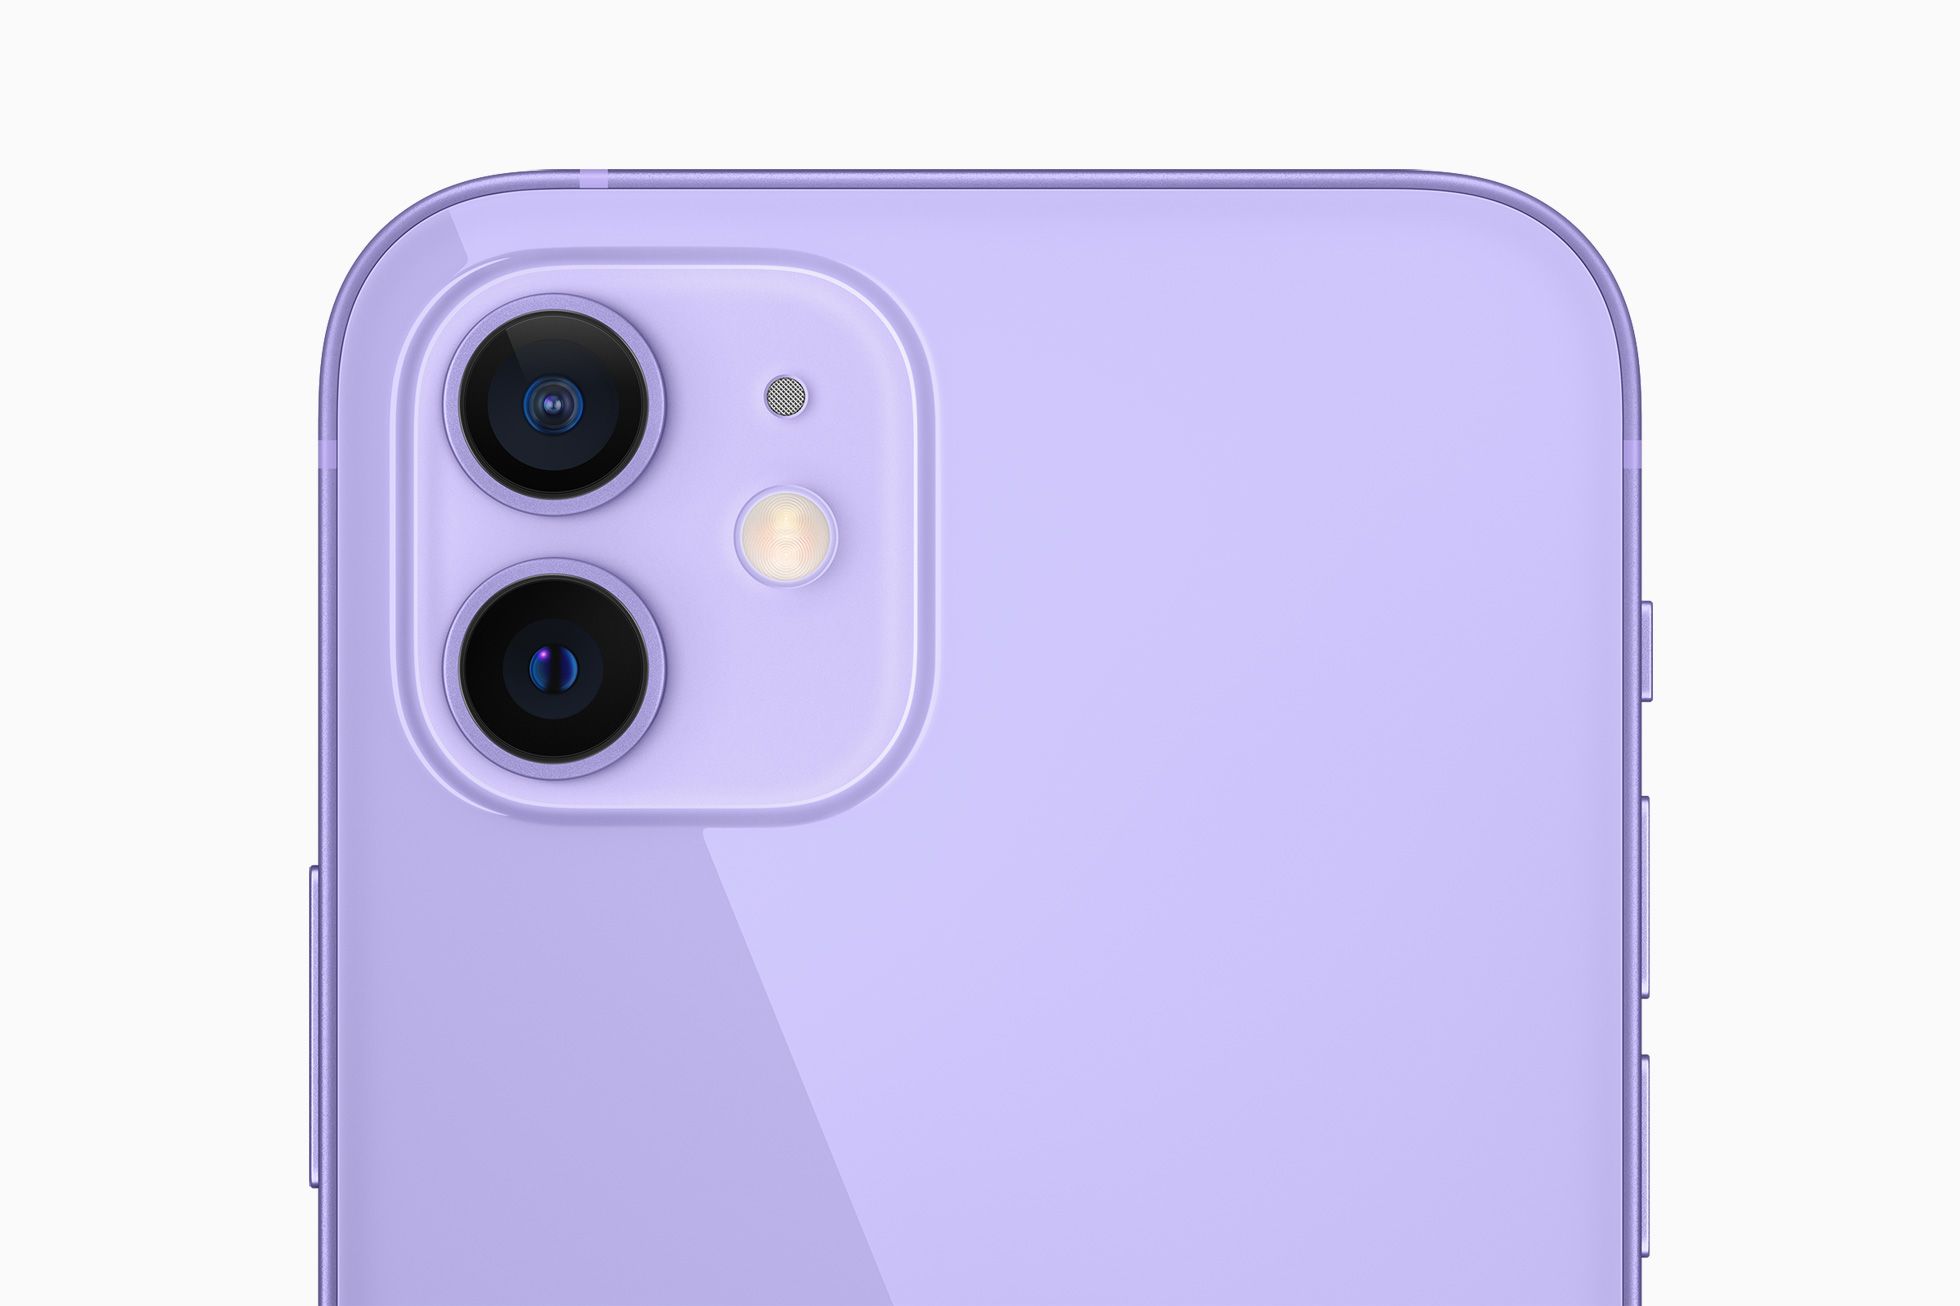 The back of the new purple iPhone 12